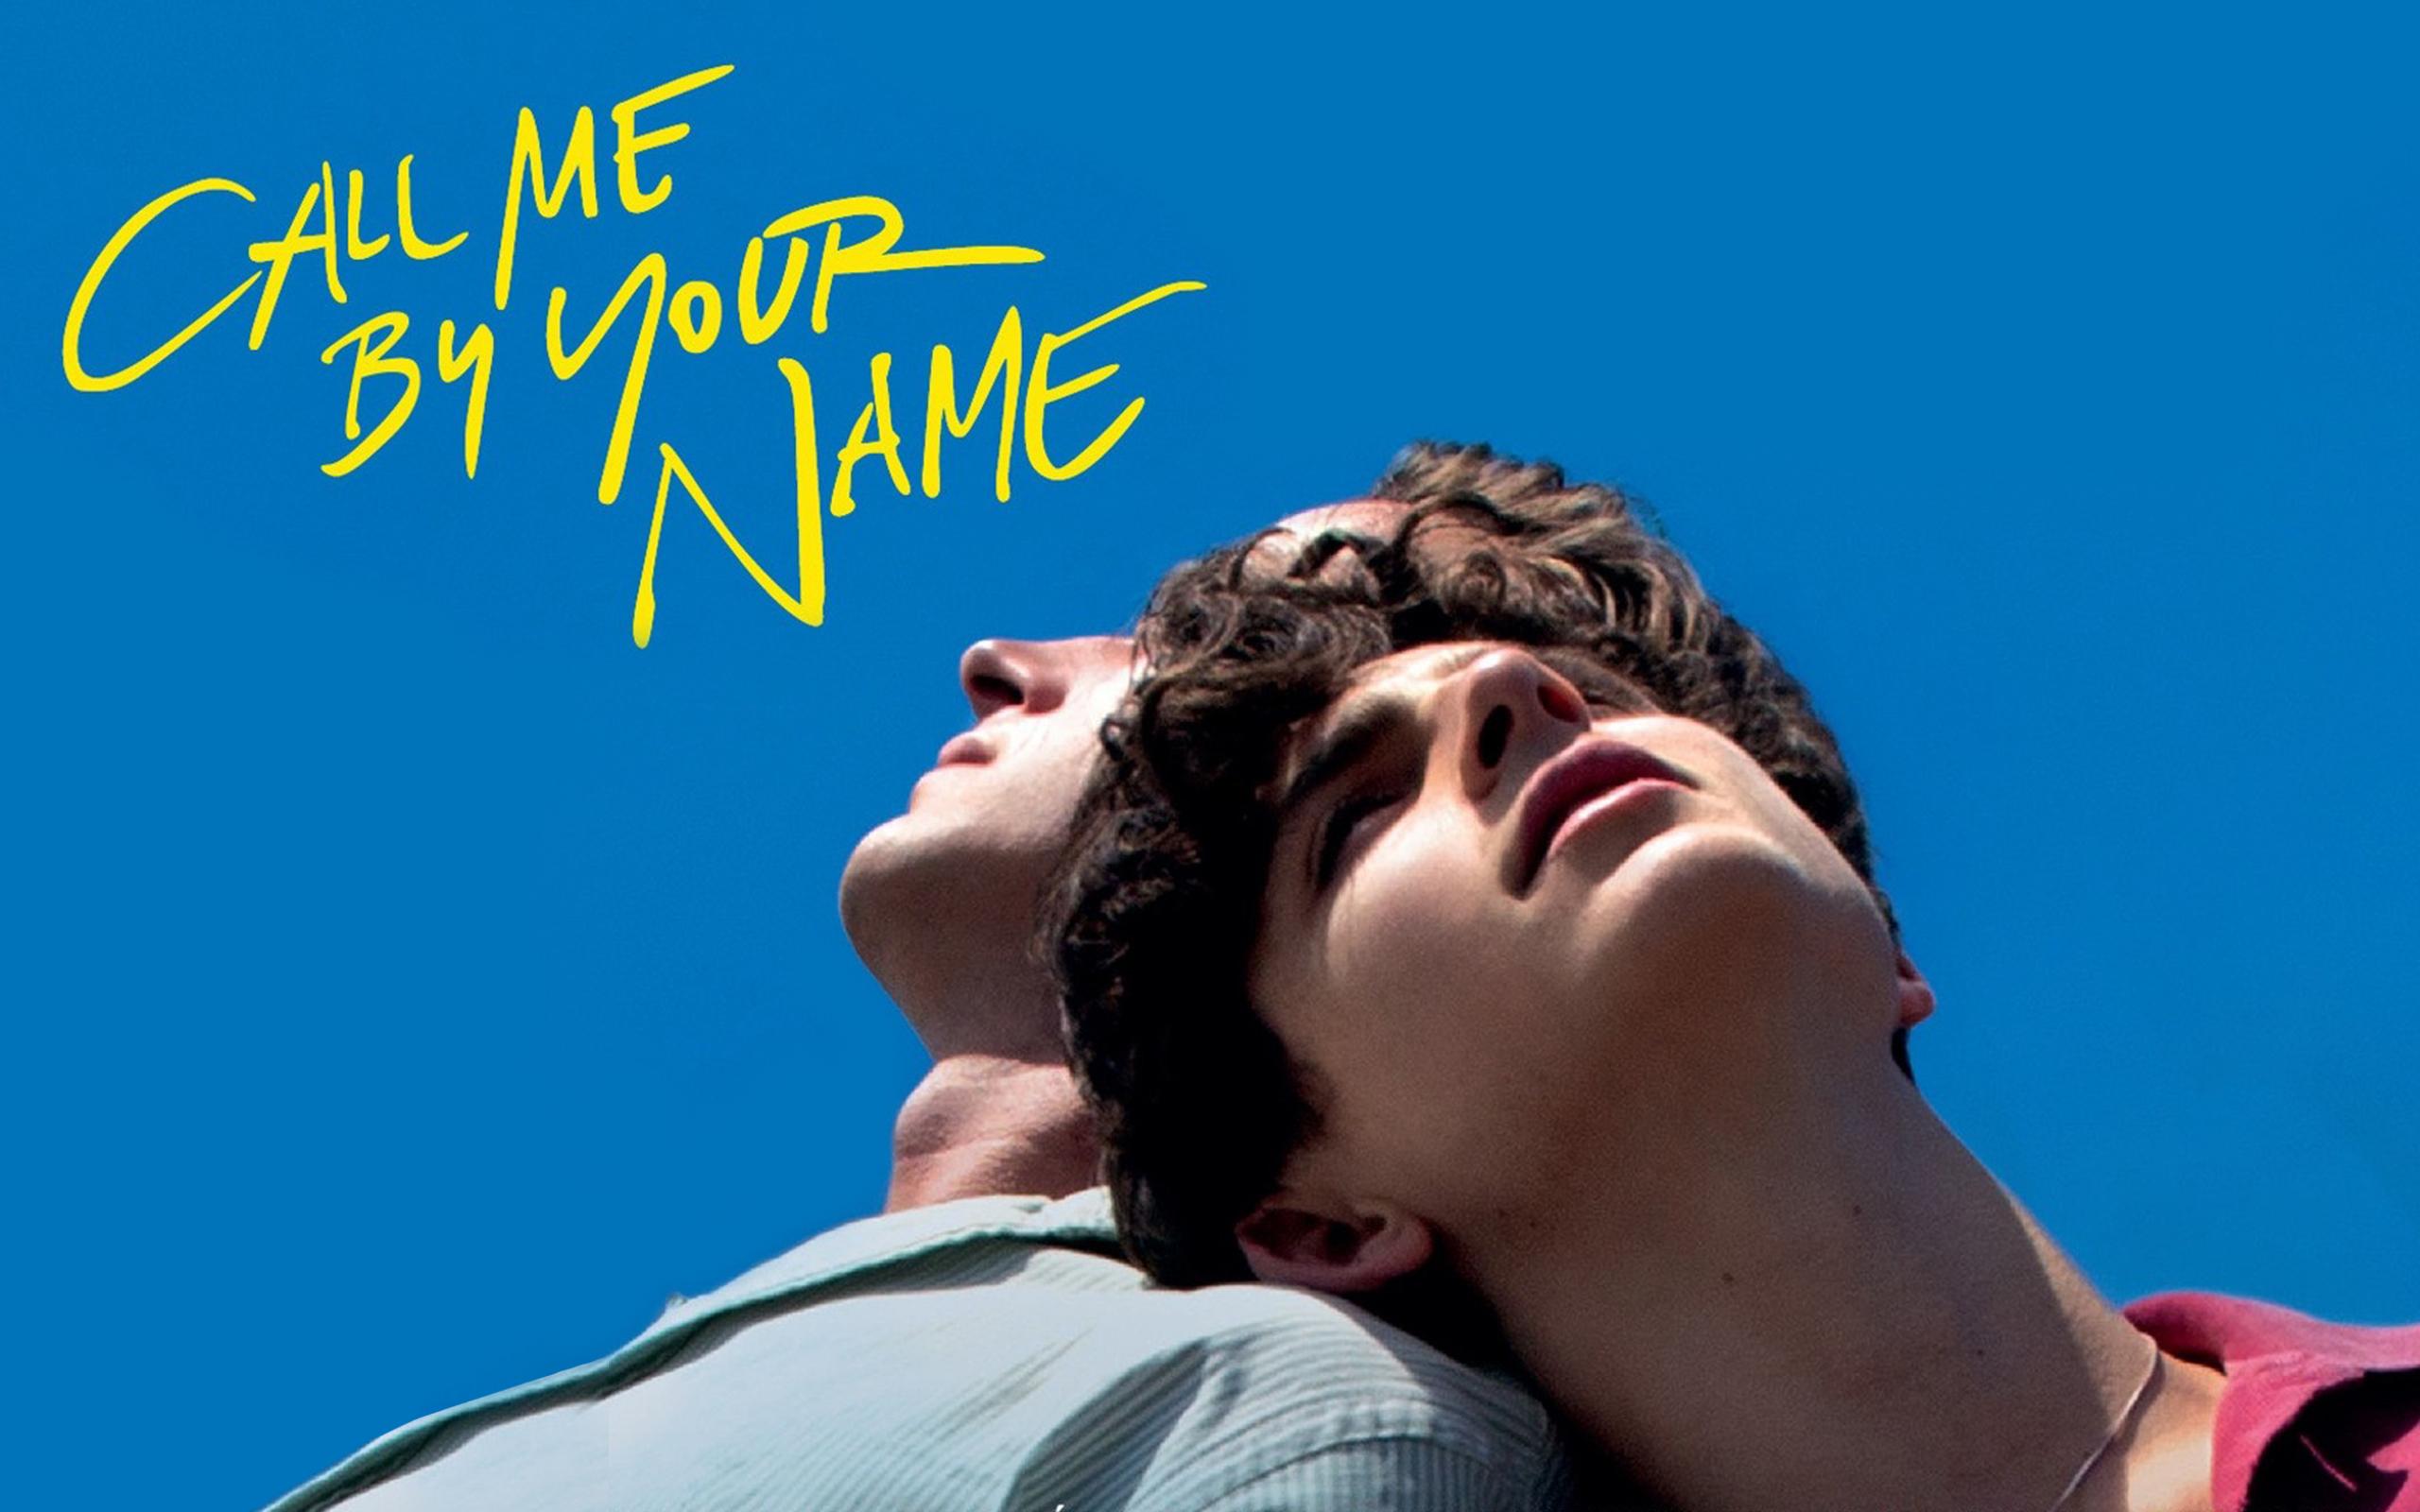 I Made Call Me By Your Name Desktop Wallpaper - 君 の 名前 で 僕